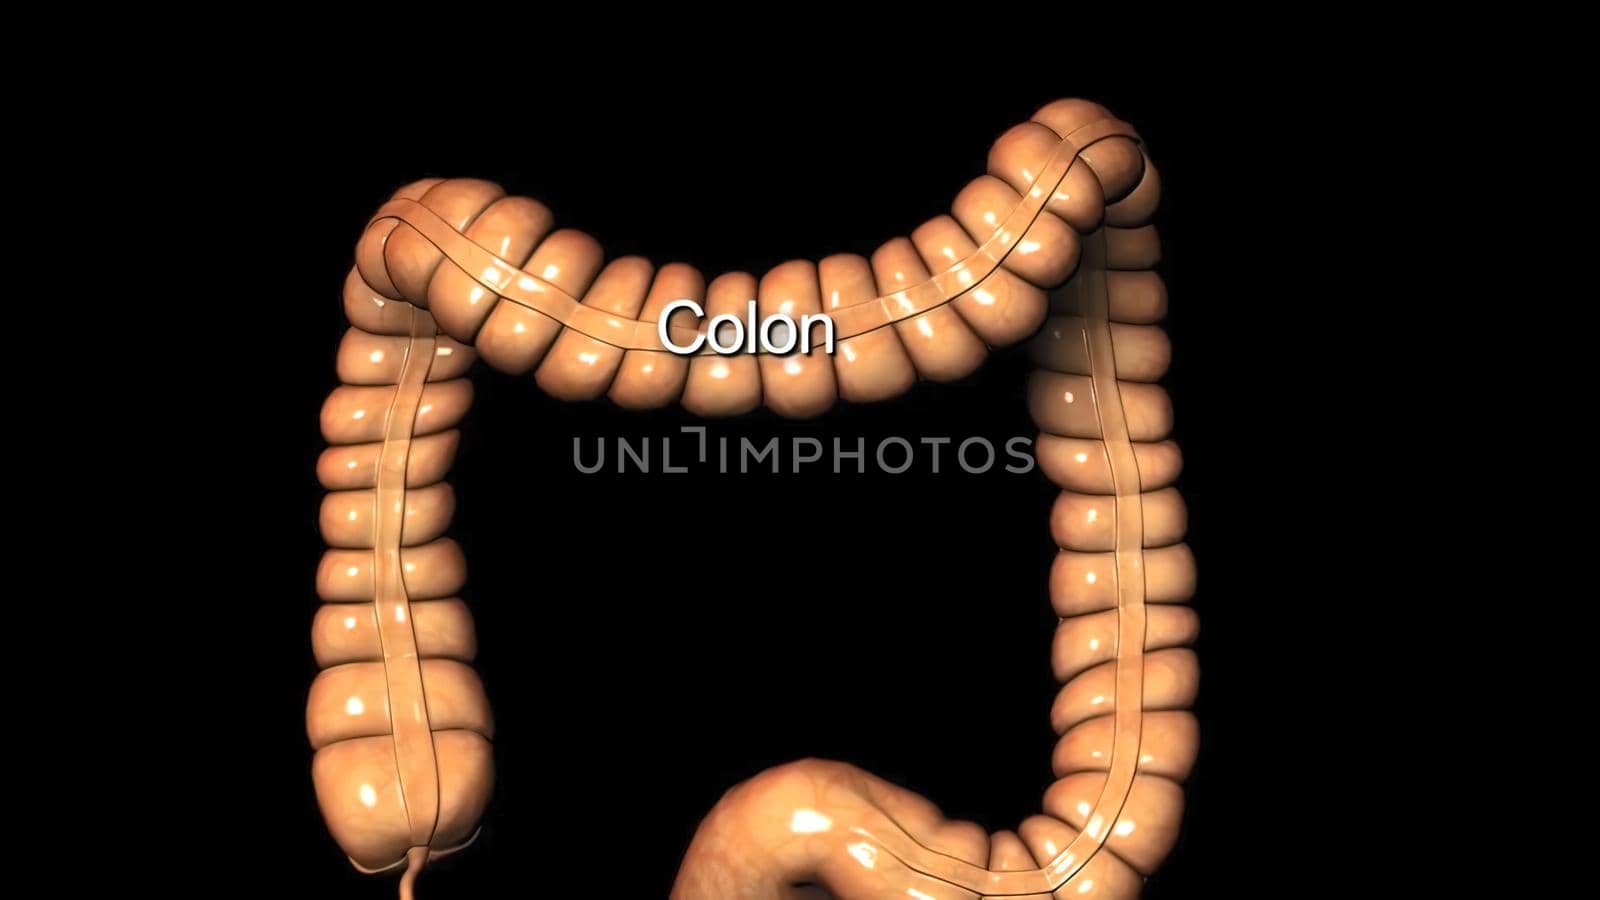 Colon during a enteroscopy with a intestinal or bowel cancer tumor visible. by creativepic